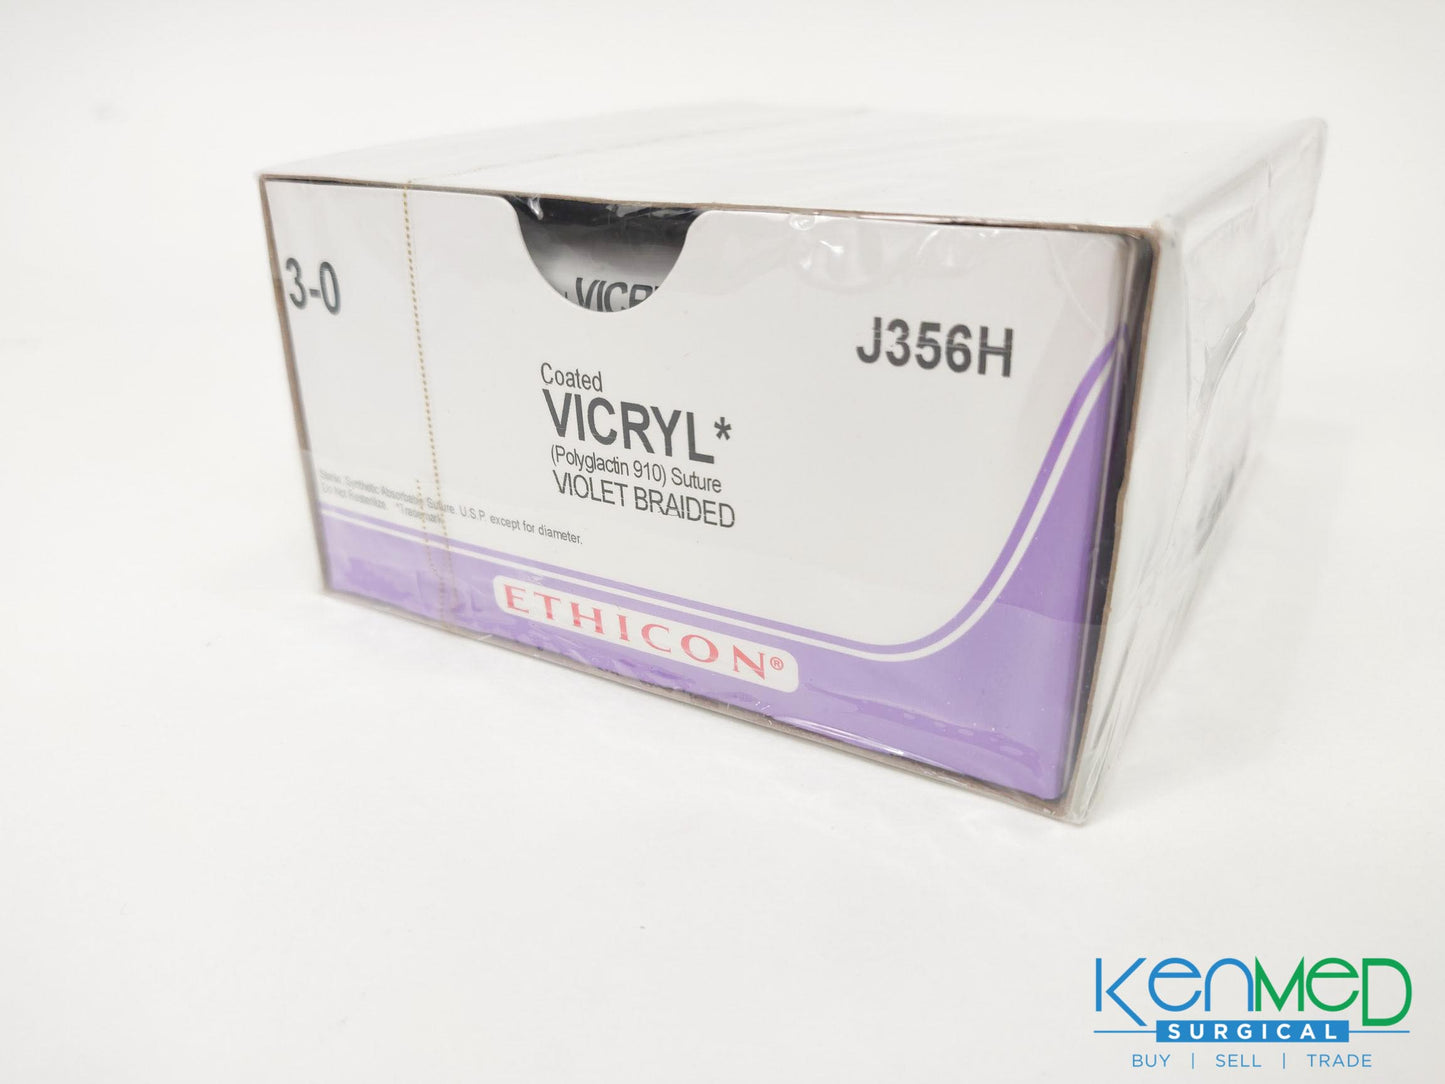 Ethicon J356H Coated Vicryl Violet Braided (EXP 02-26-2023)